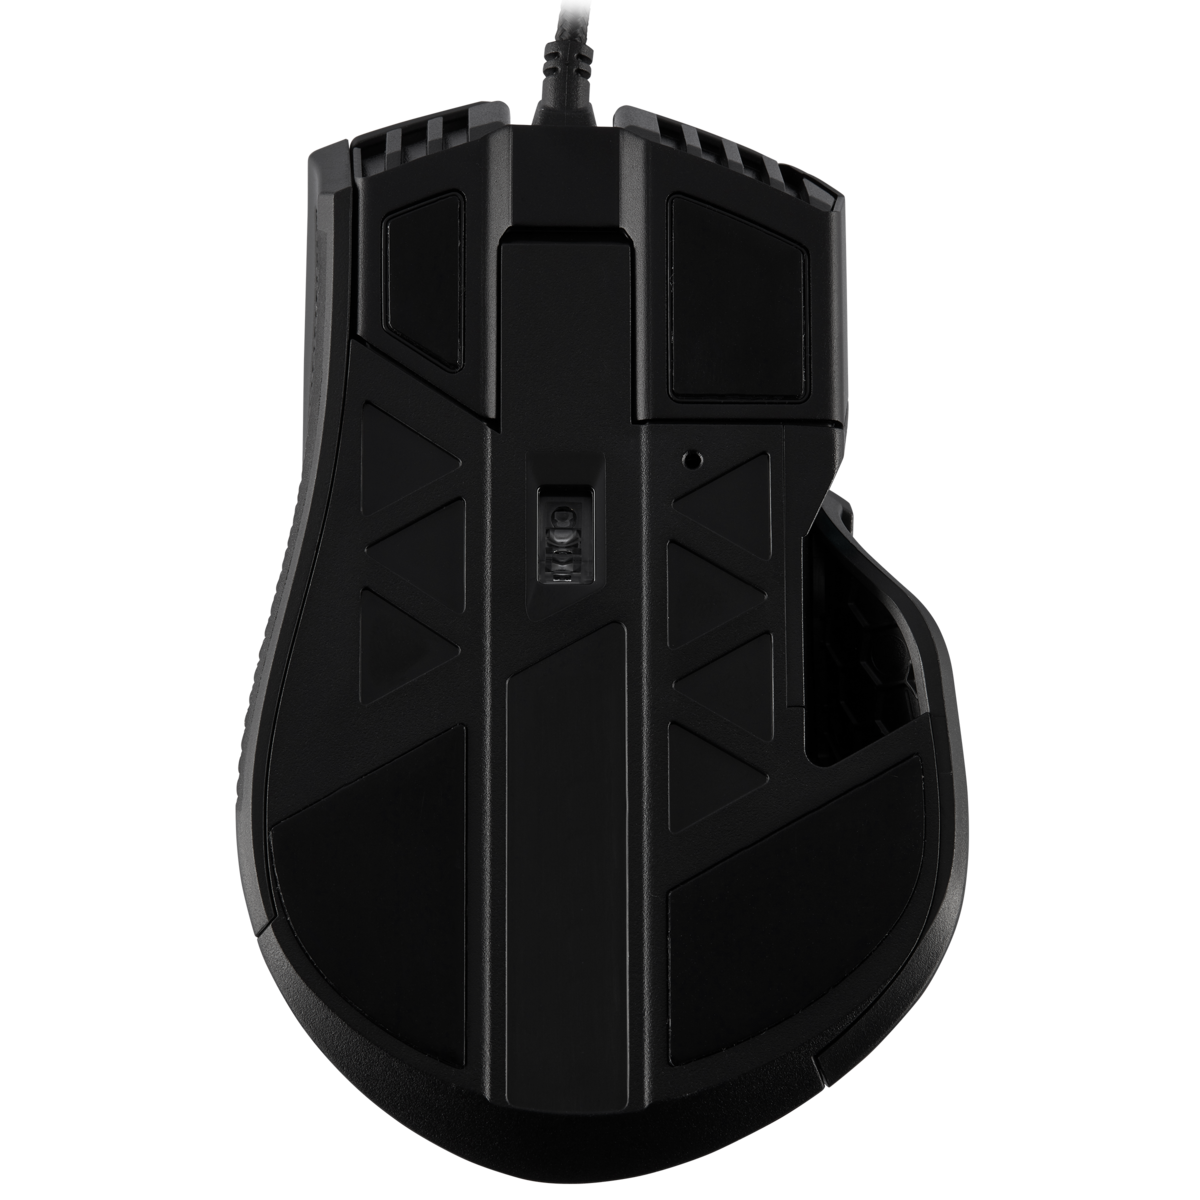 Corsair Ironclaw Rgb Fps Moba Gaming Mouse 11 Theoverclocker